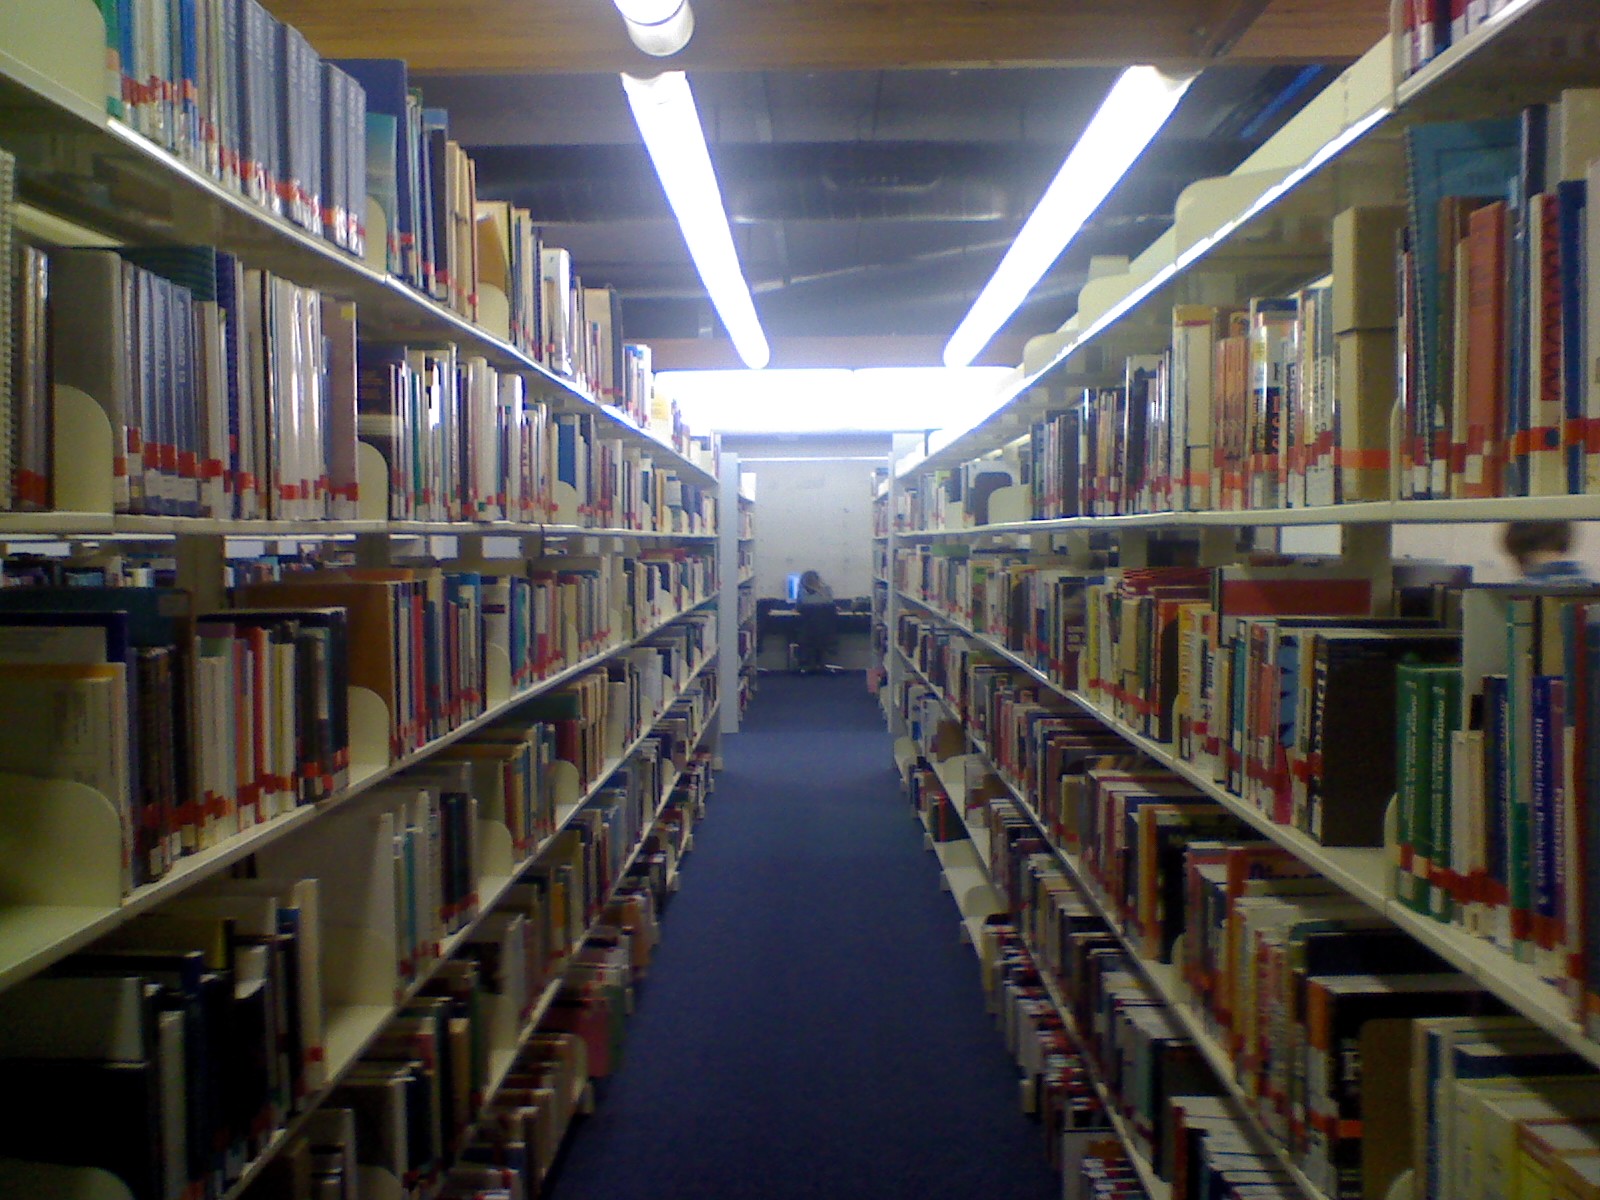 a row of book shelves with a person sitting in between